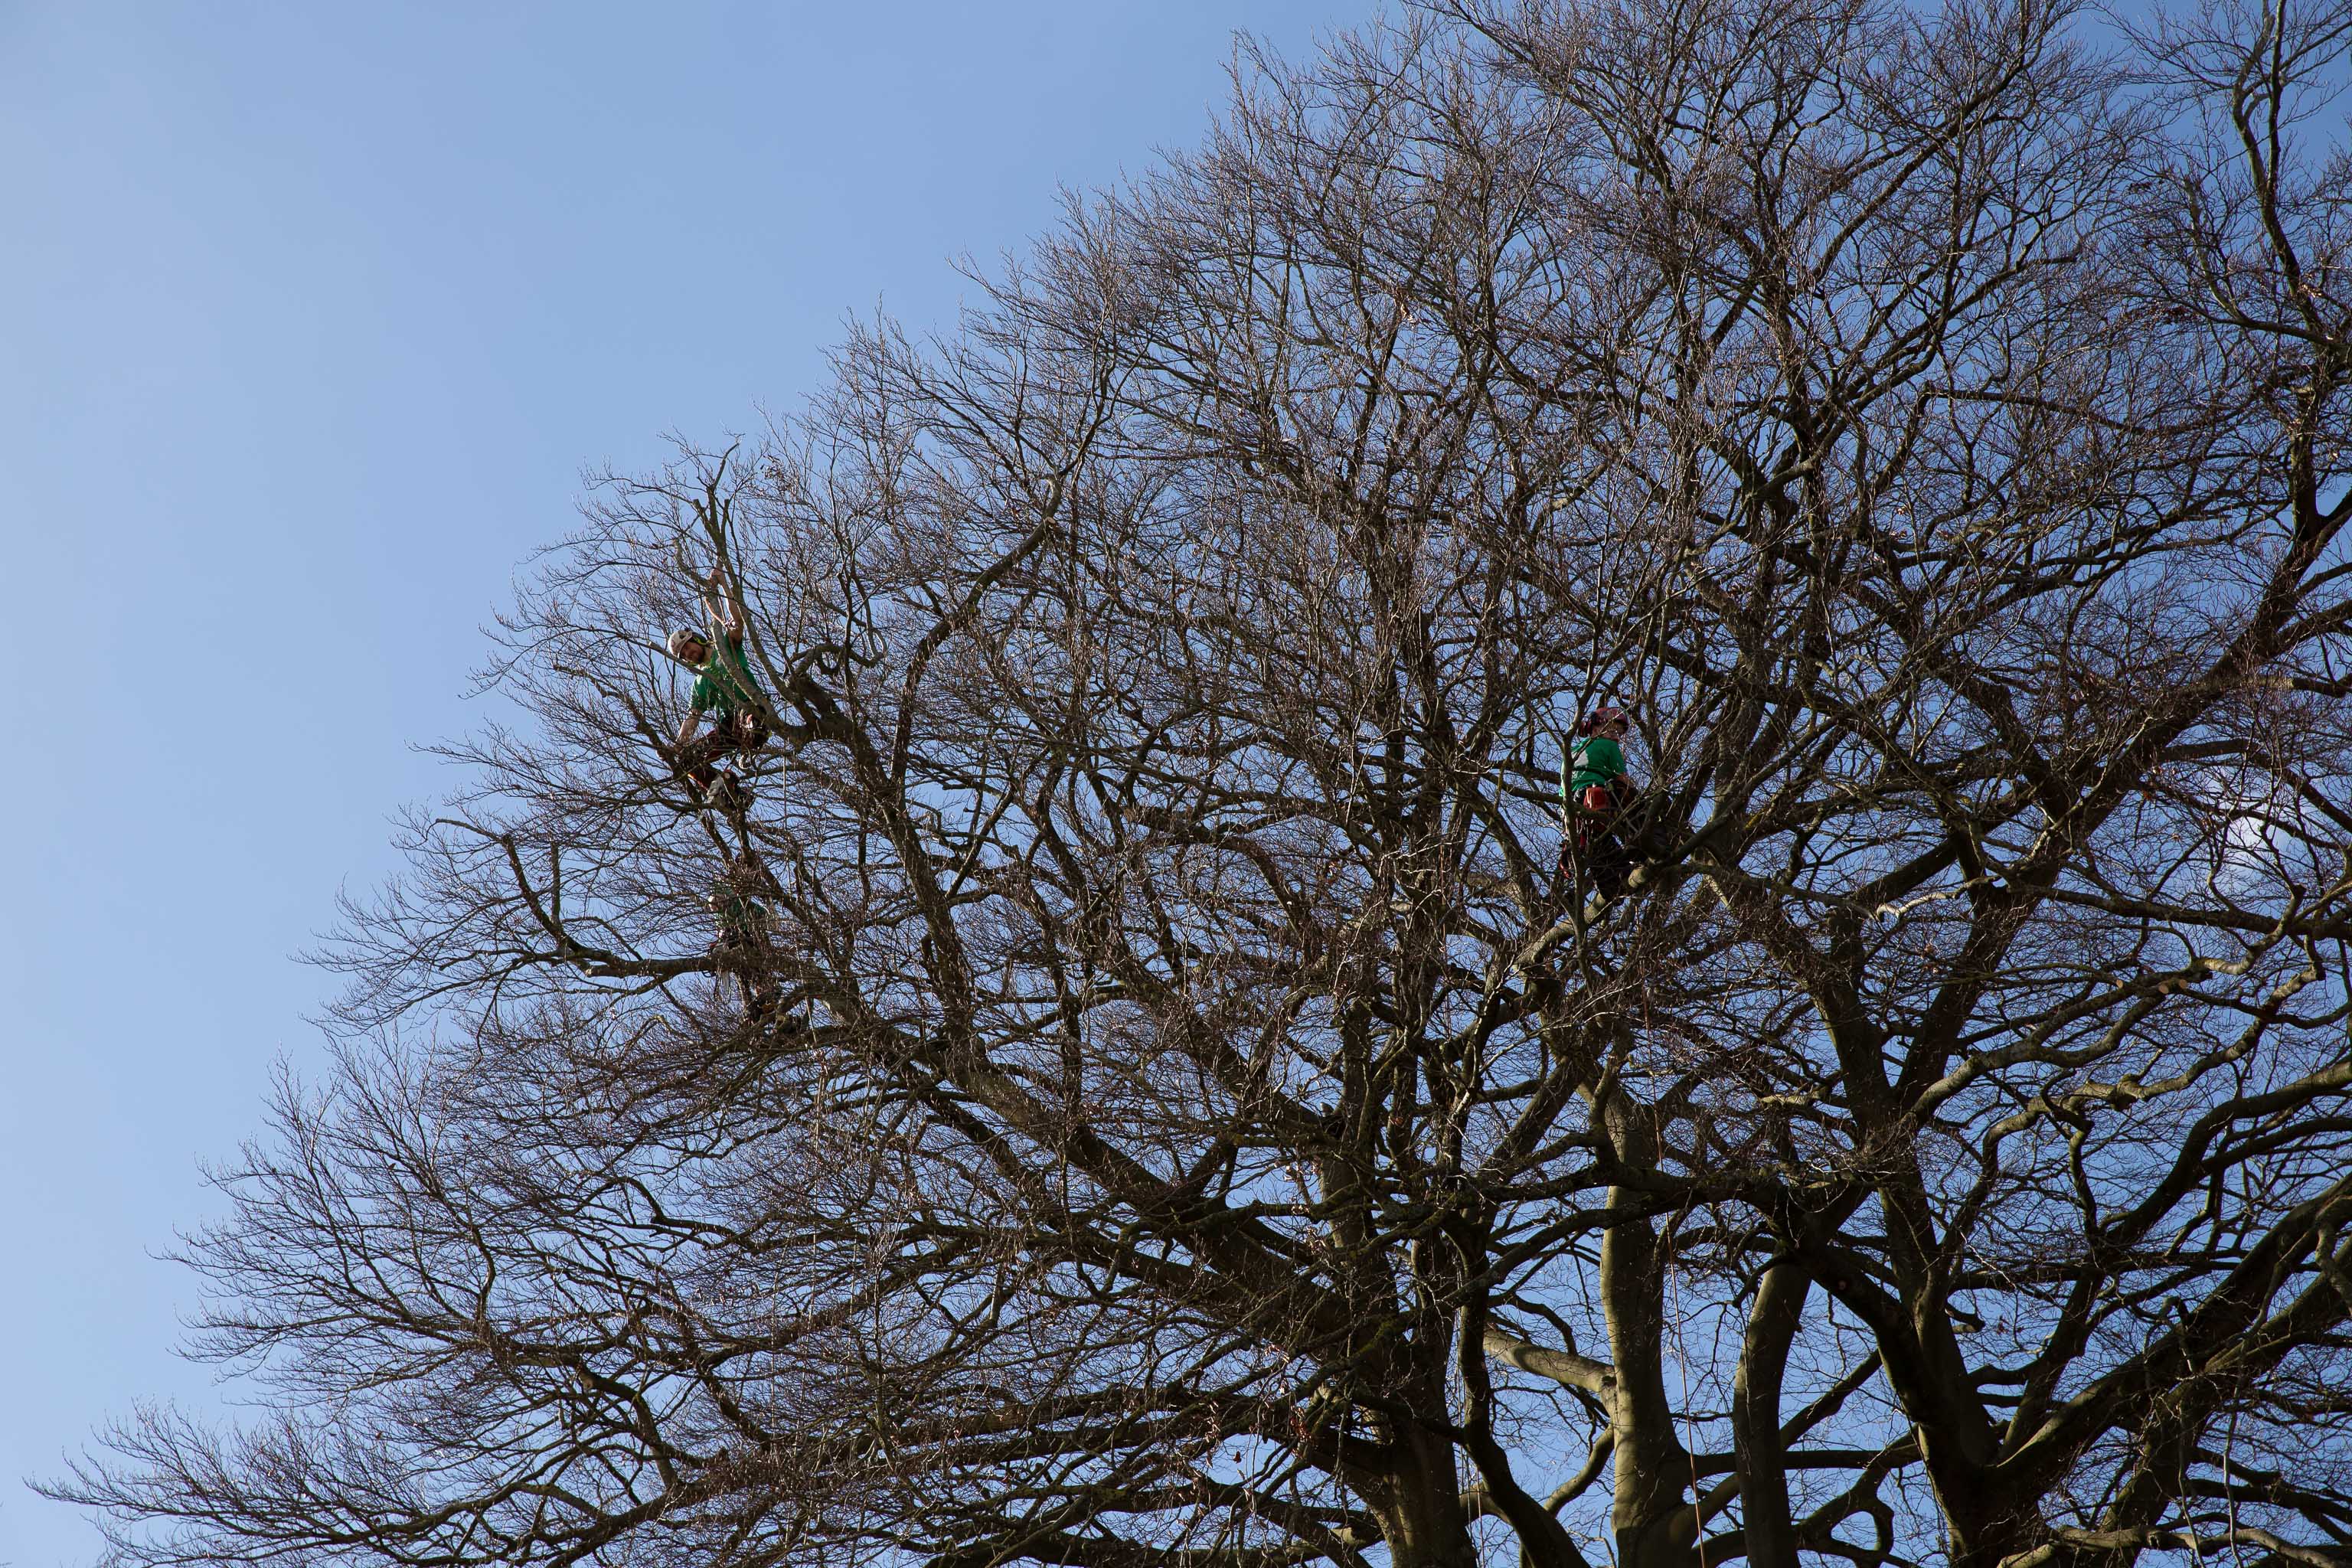 Arboreal
I say, there's men in that tree! Lots of pruning being done in the Paragon back garden today.
